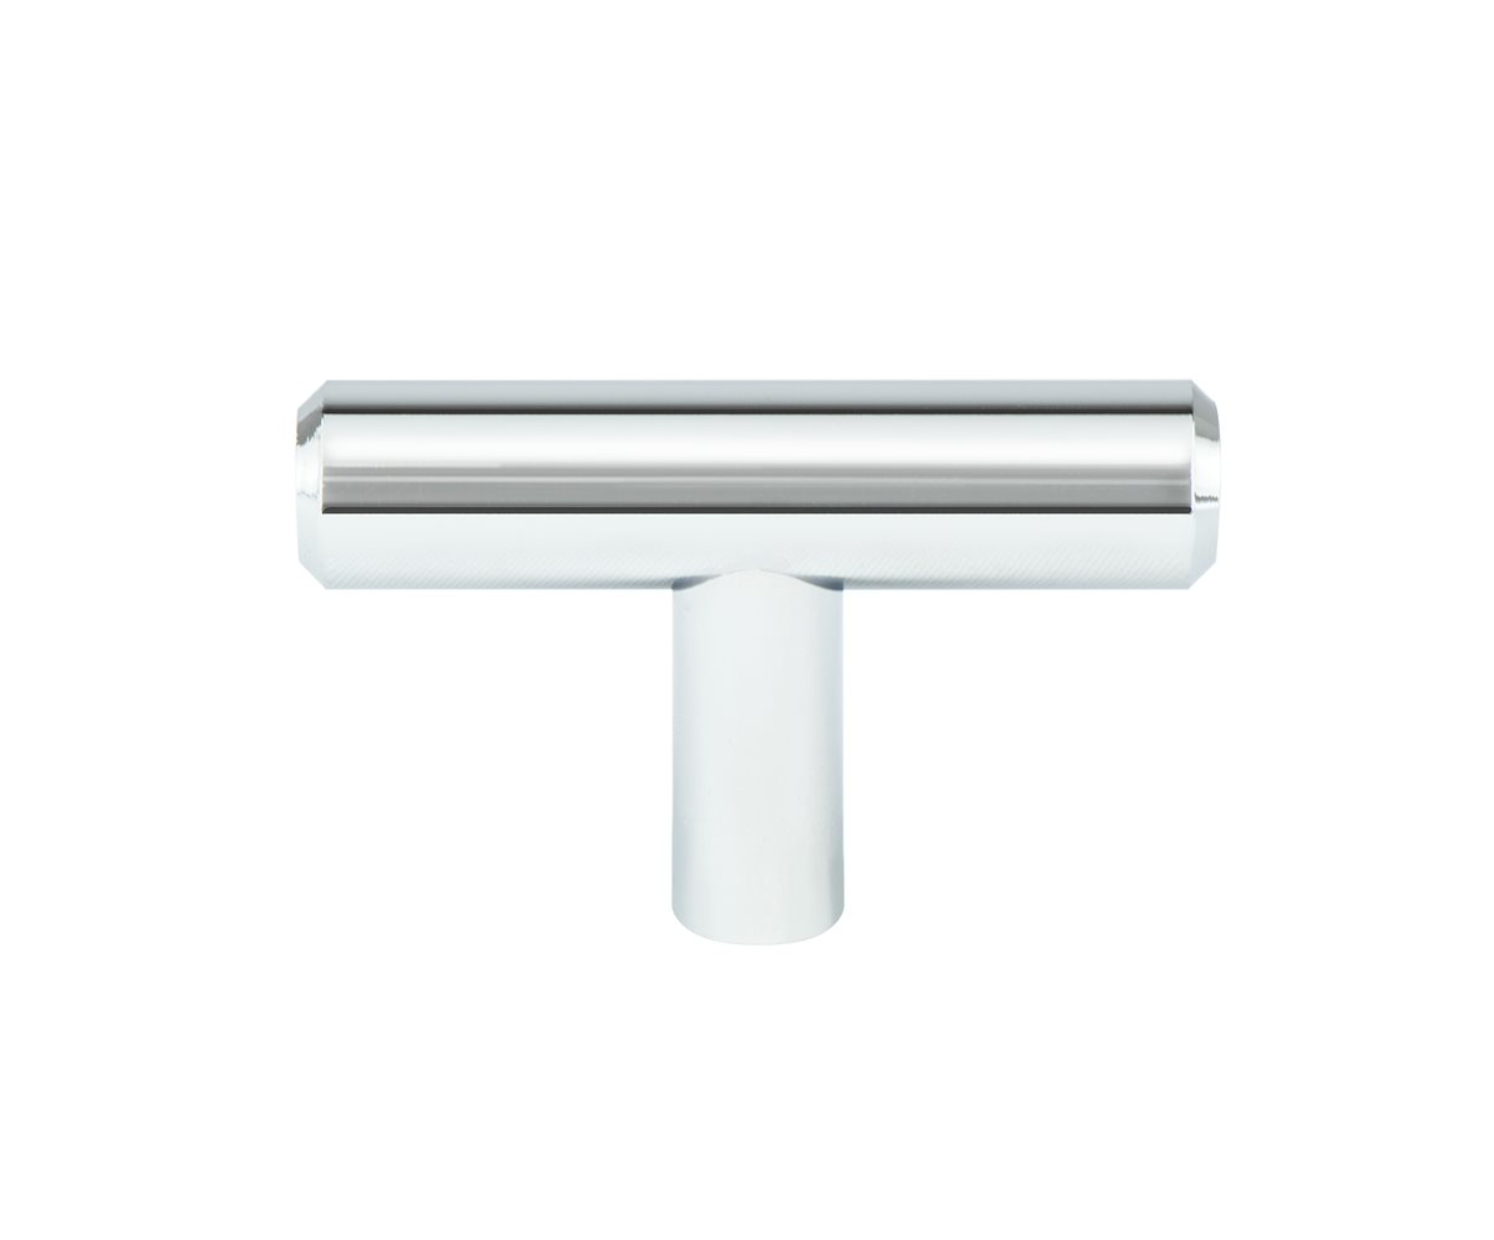 Polished Chrome "Dash" T-Bar Round Knob and Drawer Pulls - Industry Hardware